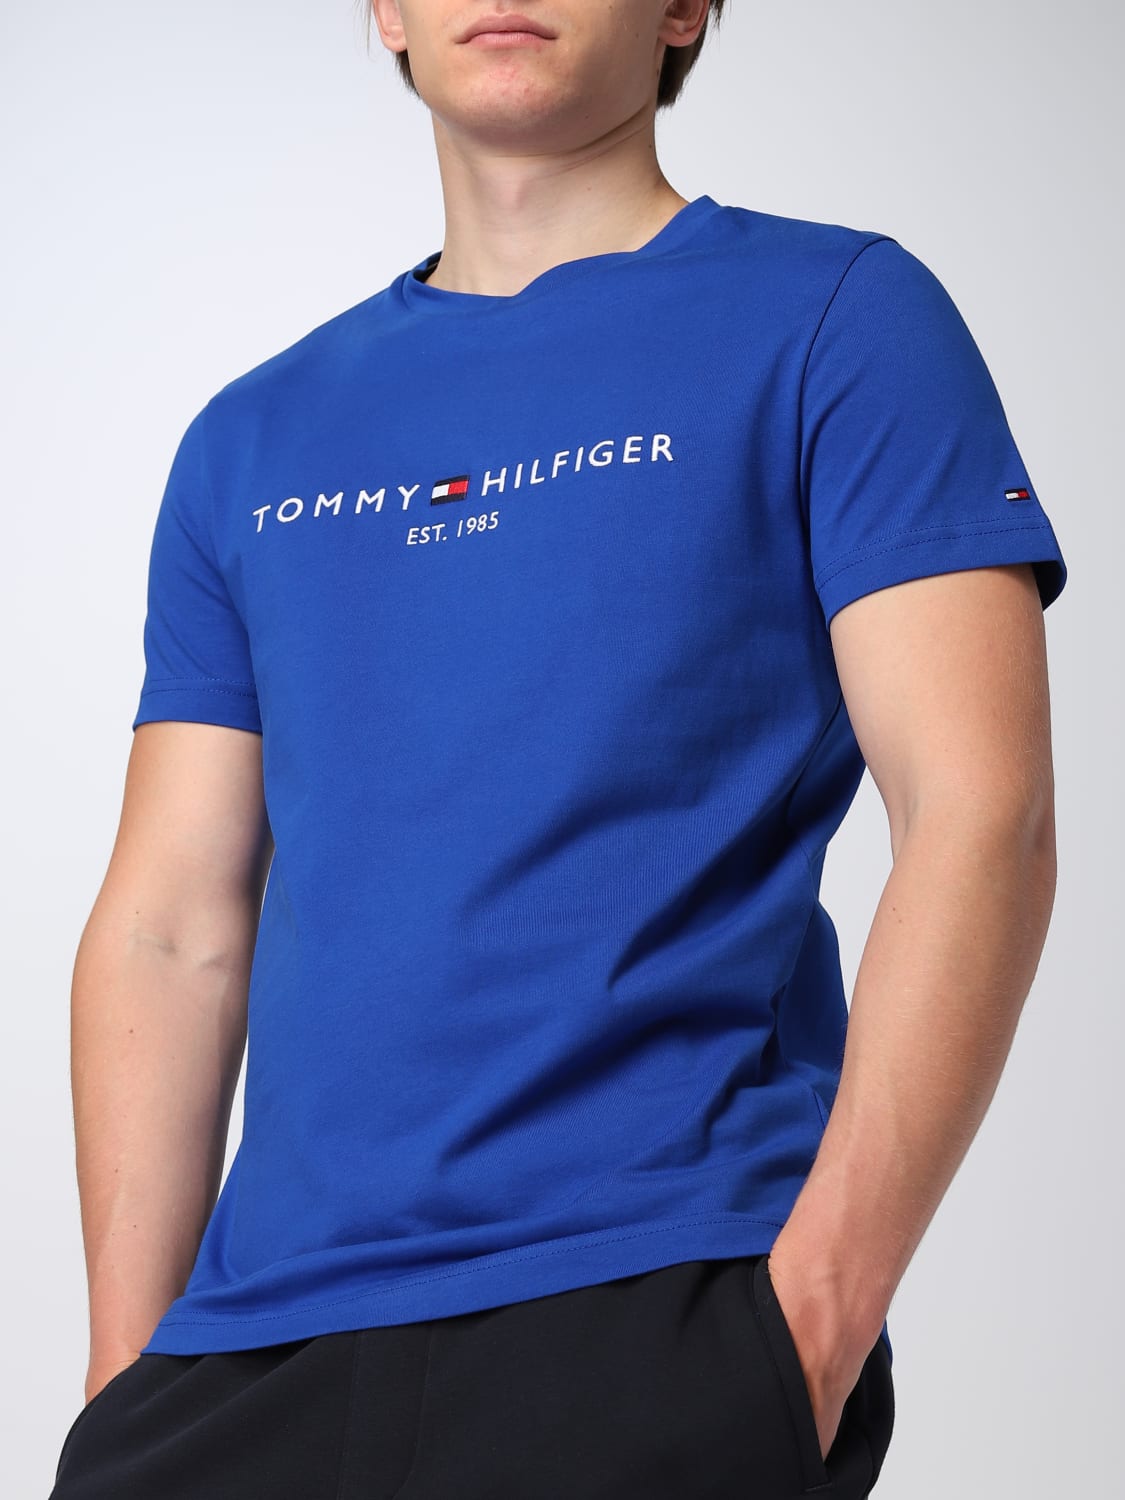 NWT TOMMY HILFIGER Men SS Crew Neck Flag Logo Classic Fit T-Shirt Tee  Cotton100%